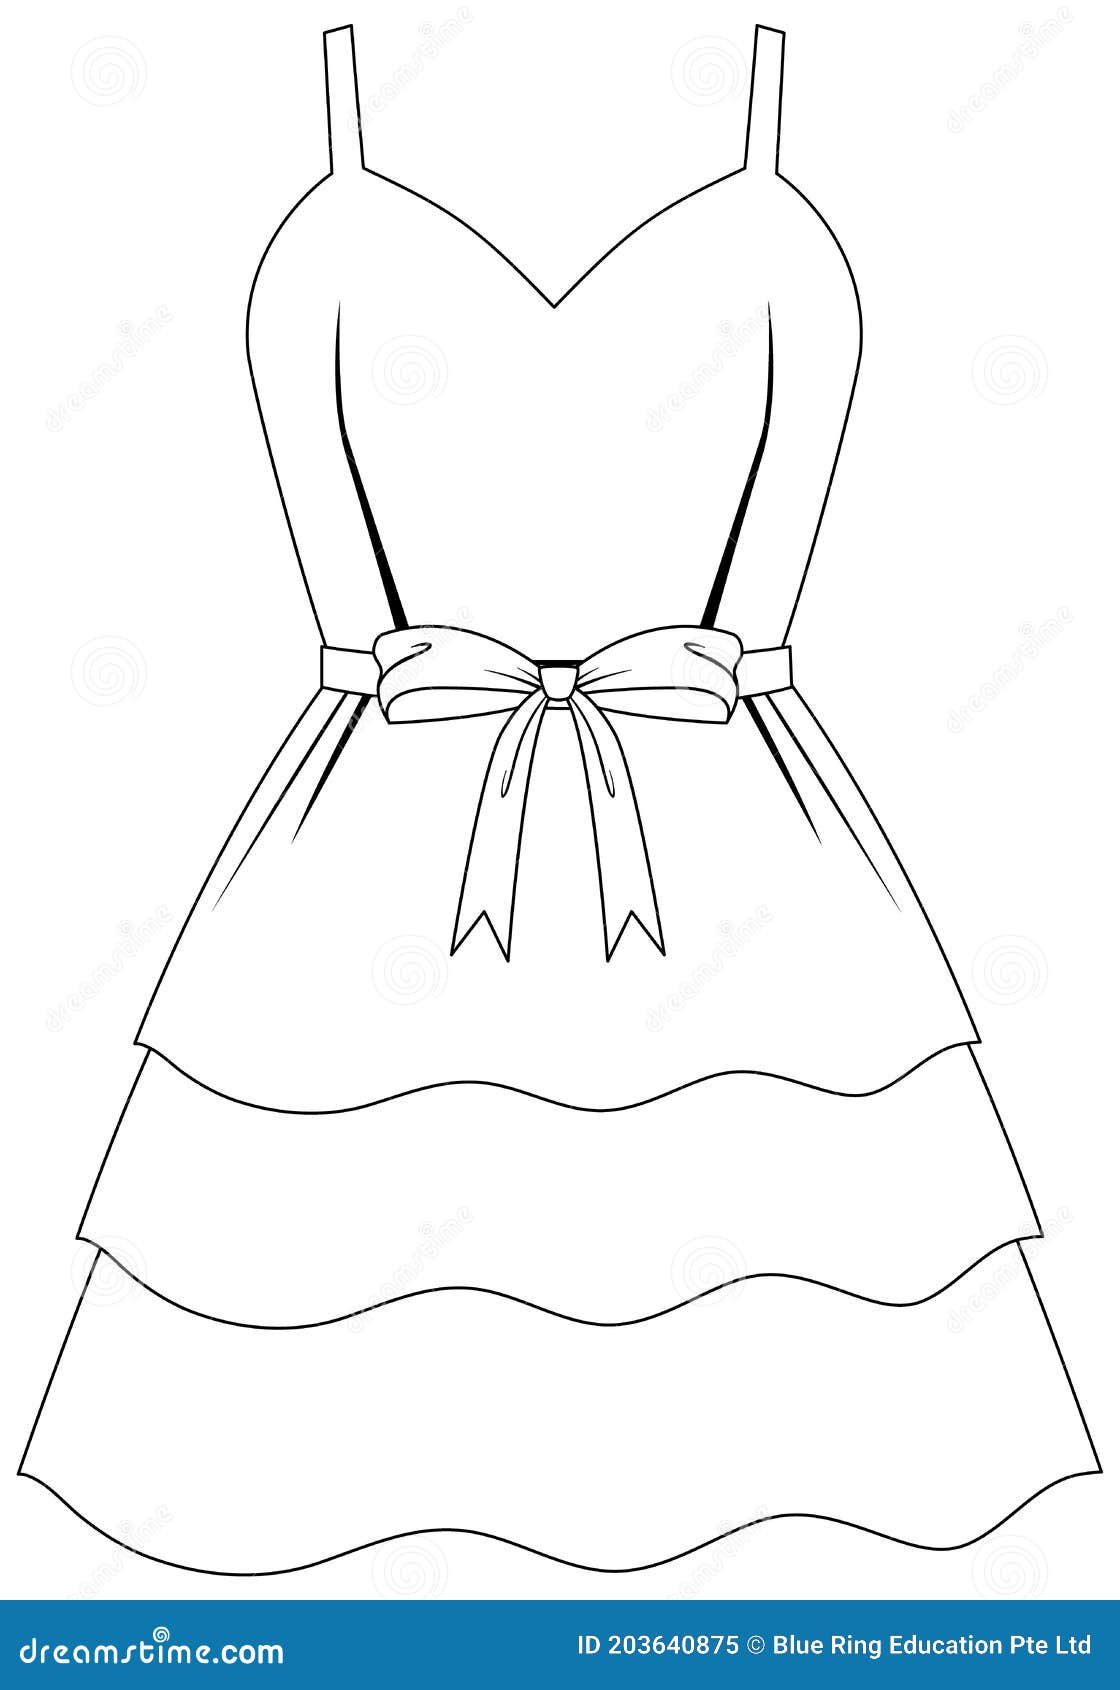 Sketches Collection Of Women's Dresses. Hand Drawn Vector Illustration.  Black Outline Drawing Isolated On White Background Royalty Free SVG,  Cliparts, Vectors, and Stock Illustration. Image 159999188.